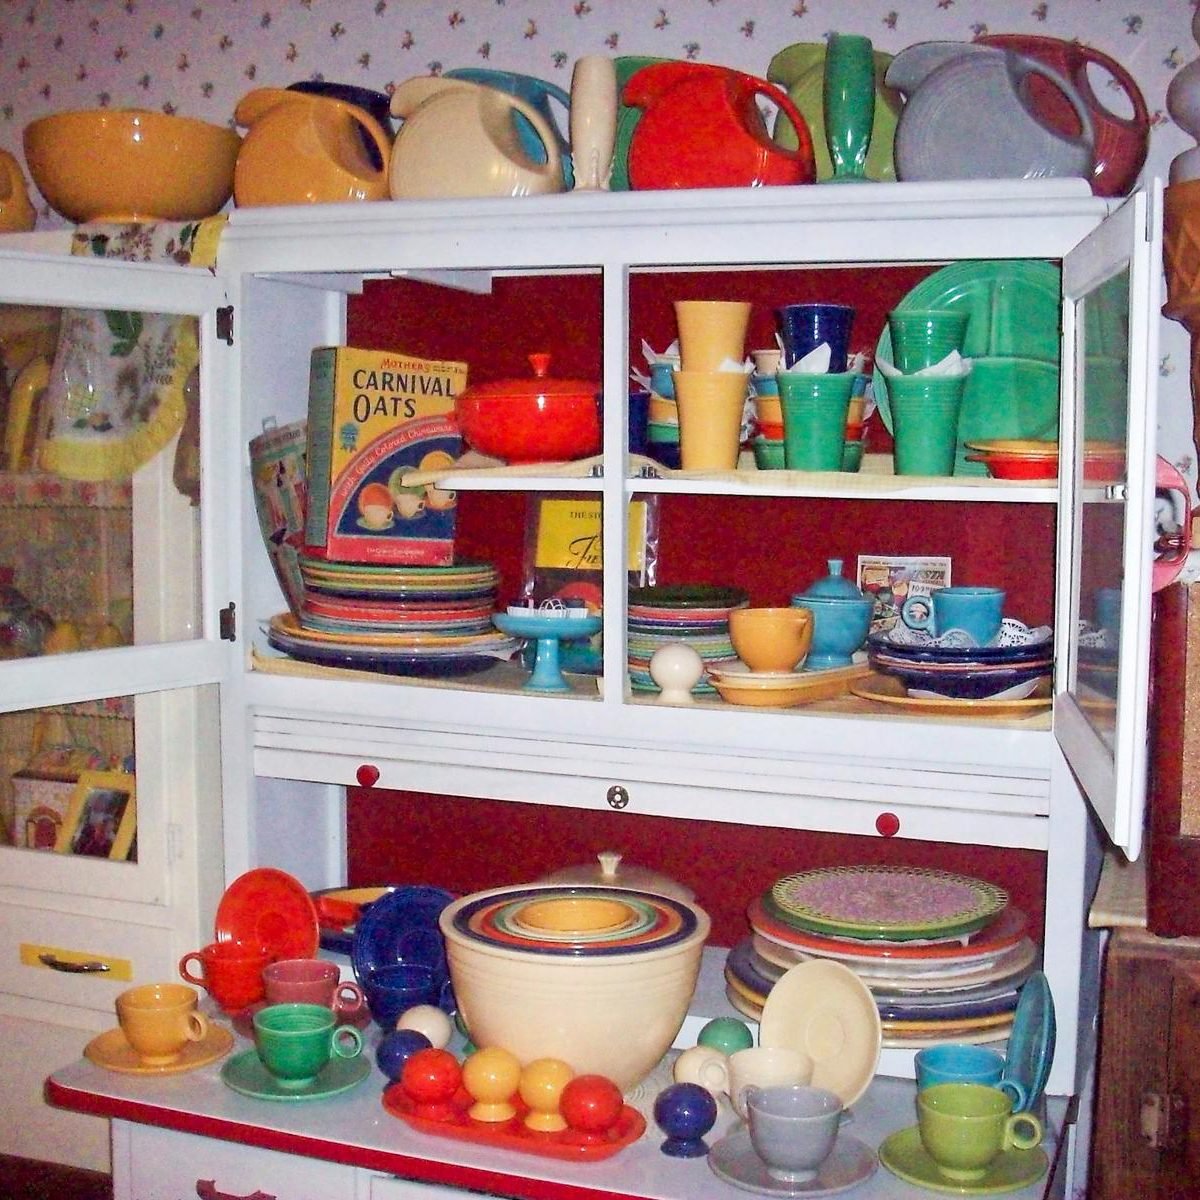 10 Things You Need to Know About Vintage Fiestaware | Taste of Home